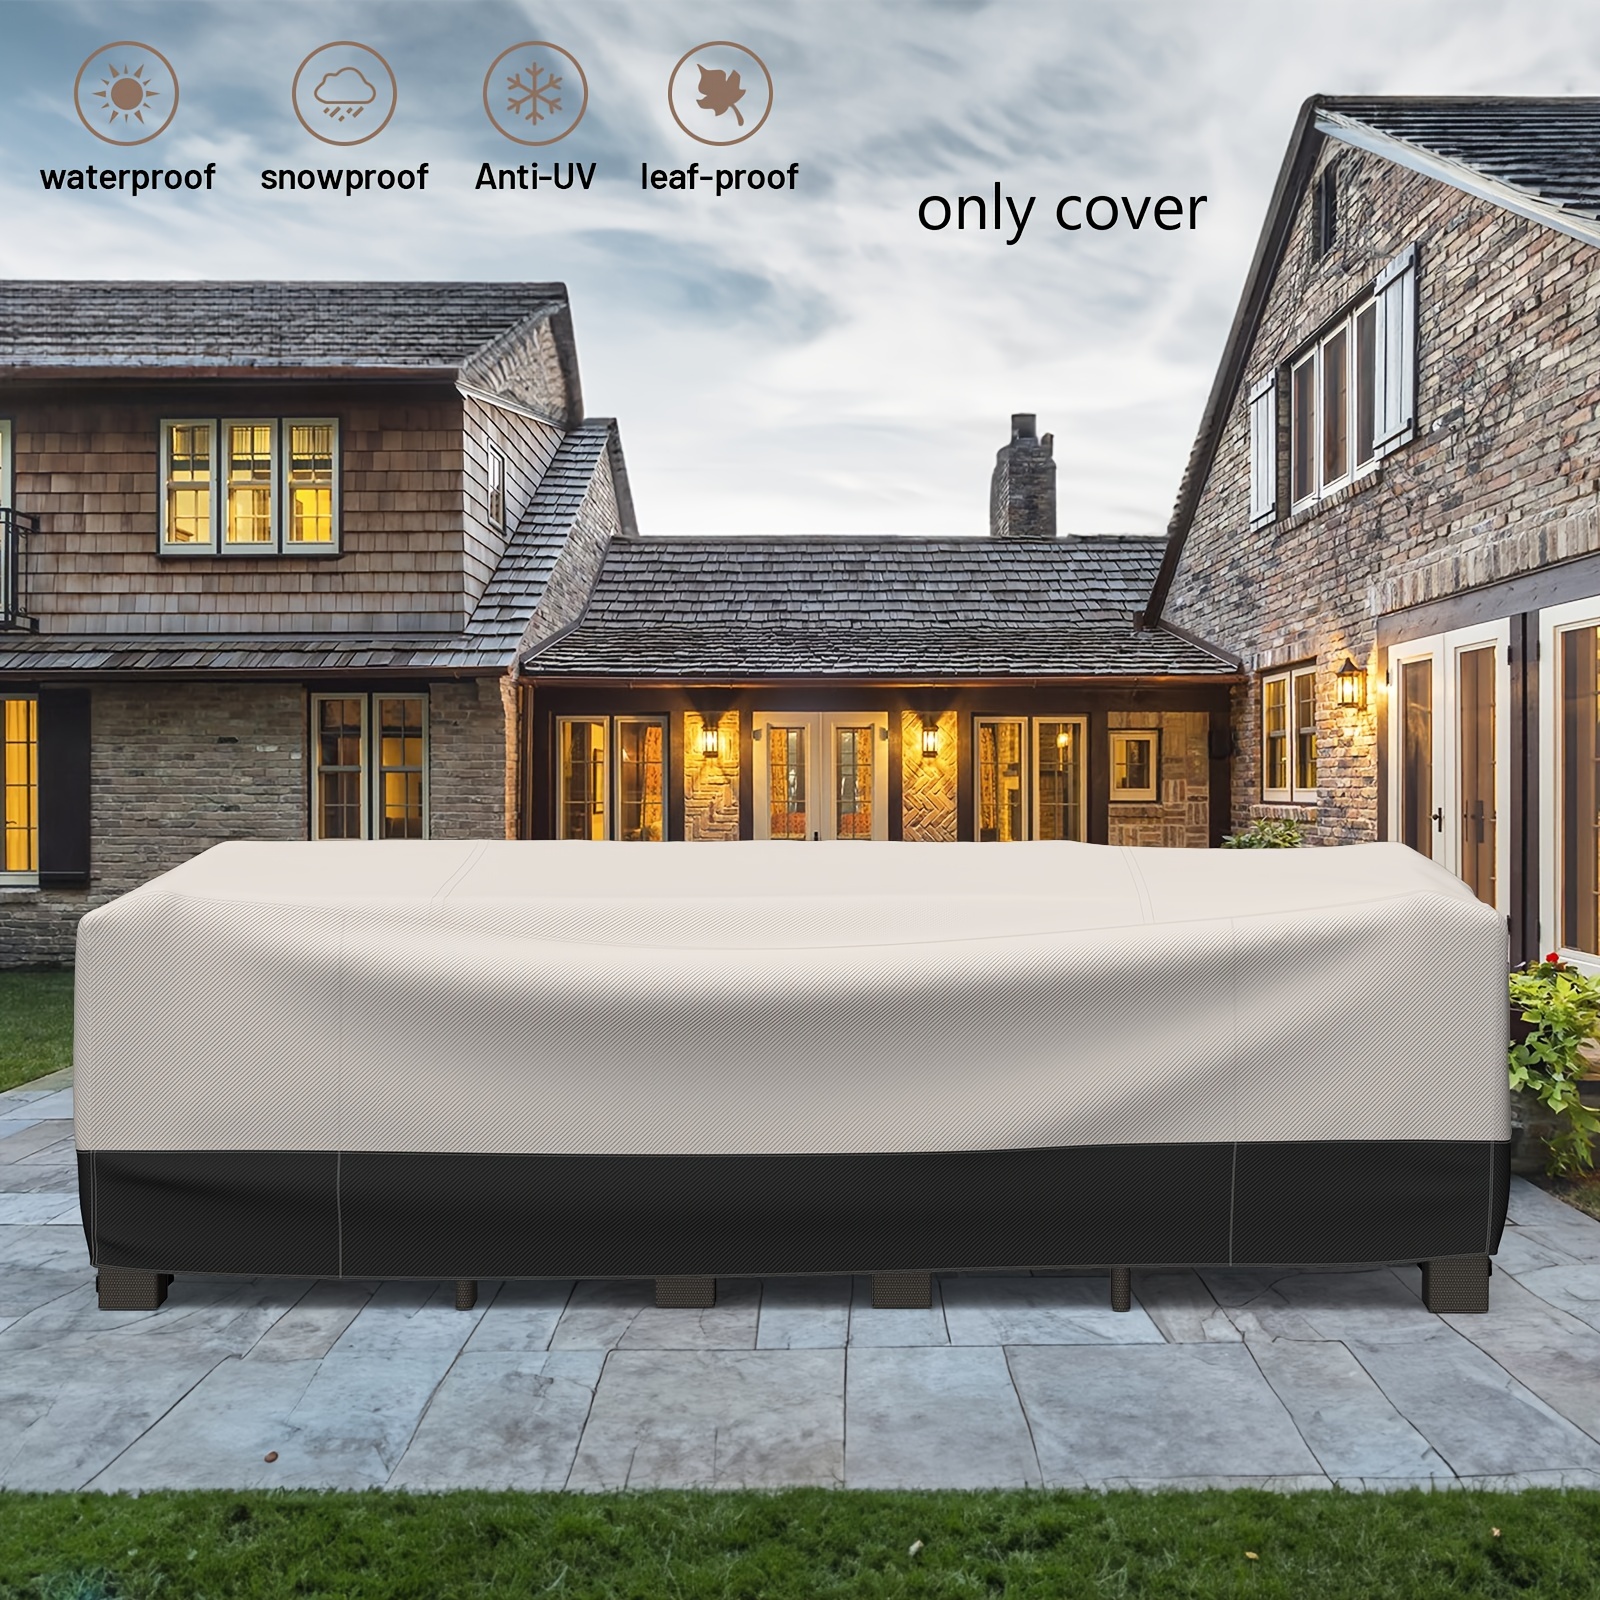 

1pc Outdoor Patio Furniture Cover, 107" X 81" X 27.9", Beige & Black, 420d Polyester, Waterproof, Uv & Snow Protection, With Air Vent, 4 Buckle Straps, Drawstring Hem, Fits Sofa & Table Sets